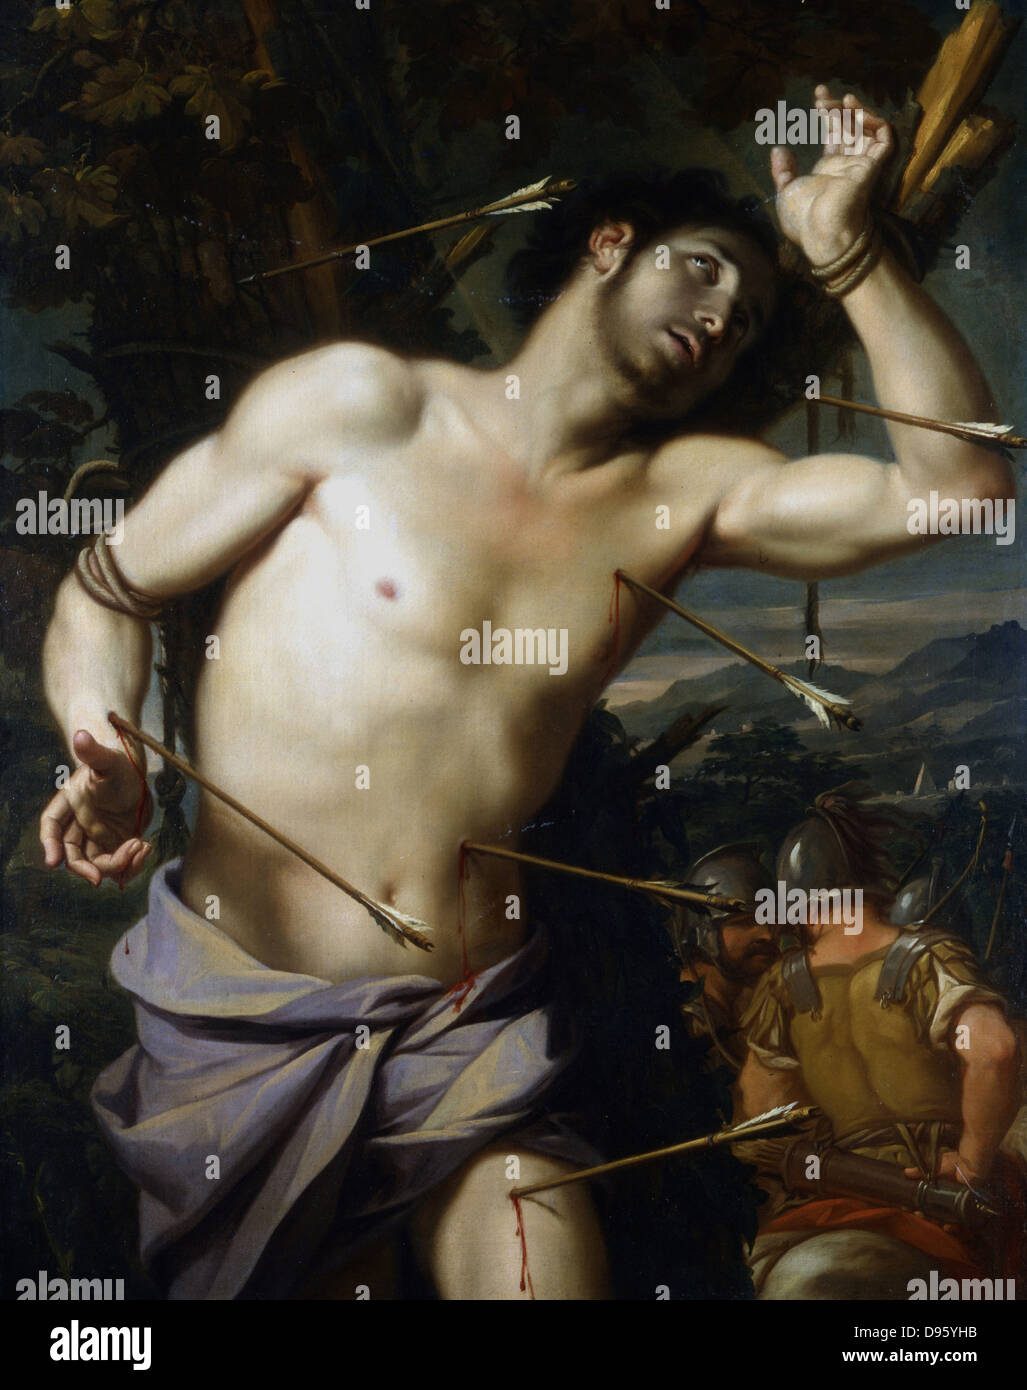 St Sebastian' (dc288) Christian martyr Roman soldier and Captain of the Praeterian Guard. Executed under Emperor Diocletian.  School of Giovanni Domenico Cerrini, called Cavaliere Perugino (1609-1681). Oil on canvas.  Private collection. Stock Photo